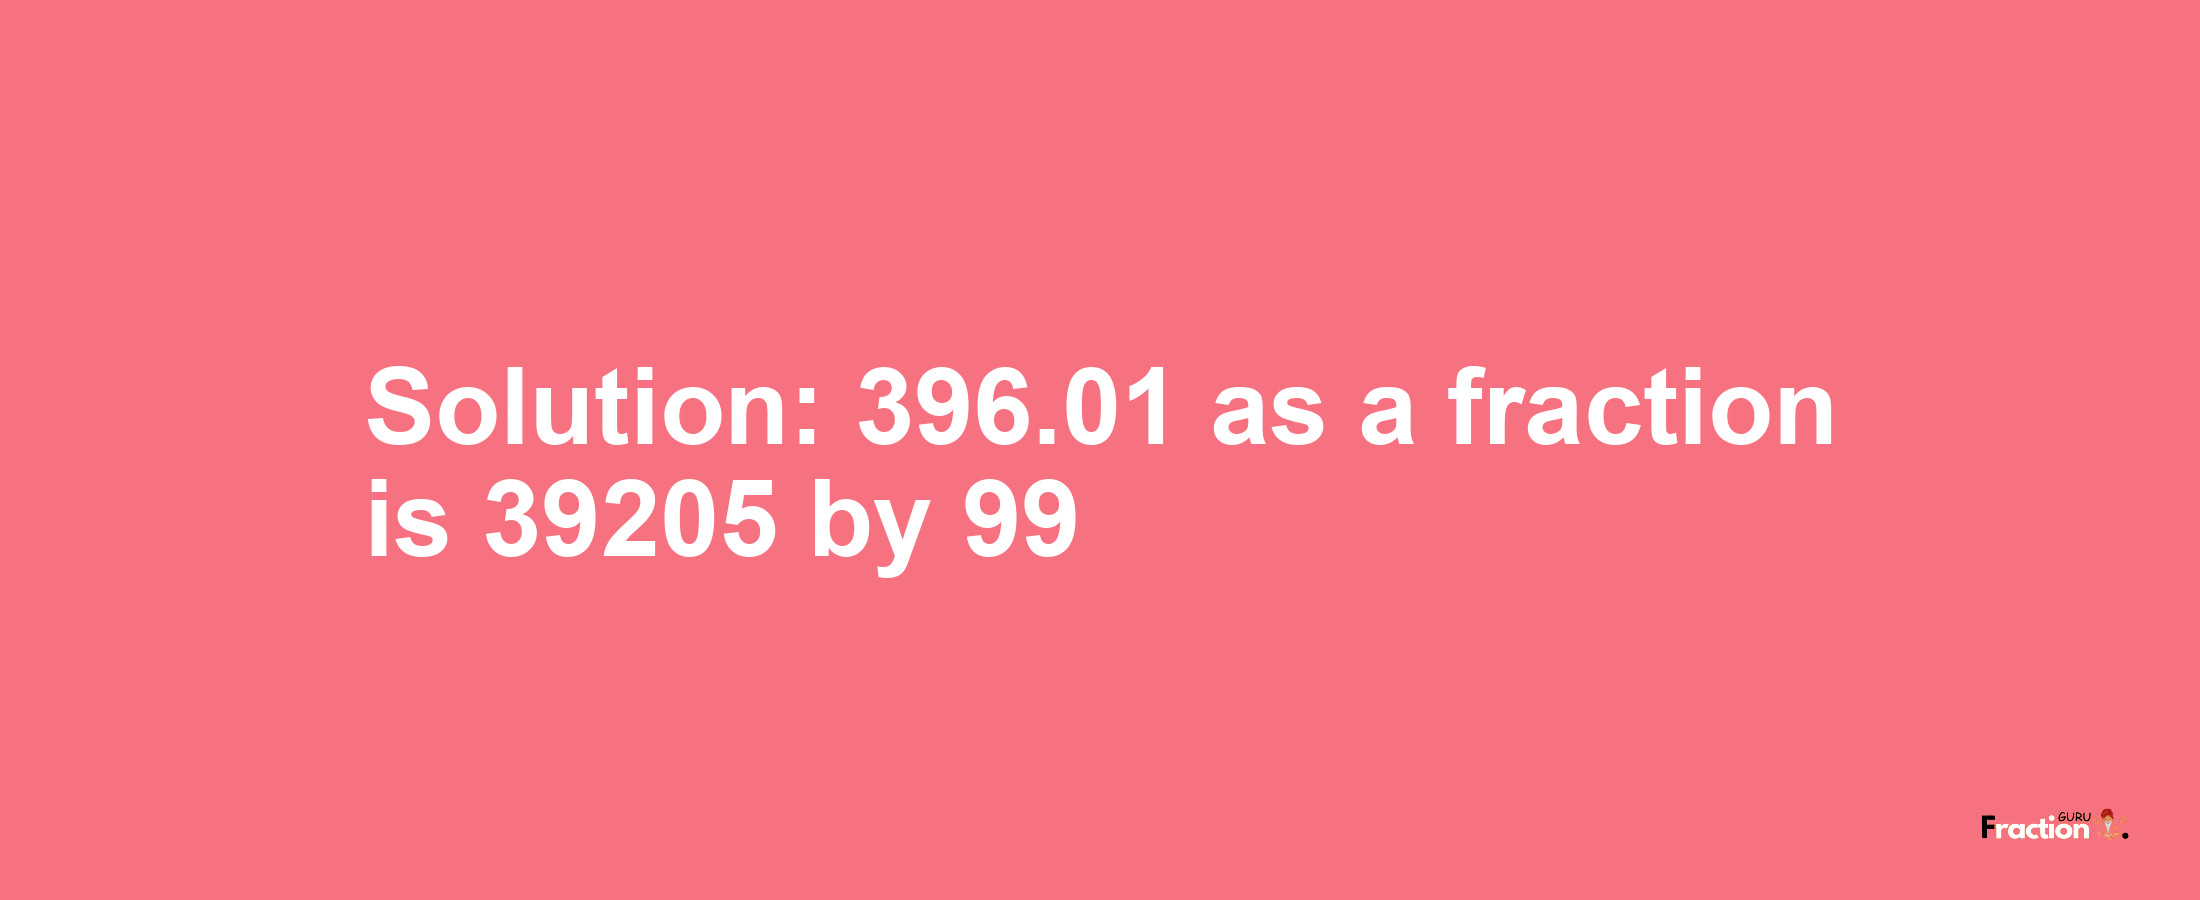 Solution:396.01 as a fraction is 39205/99